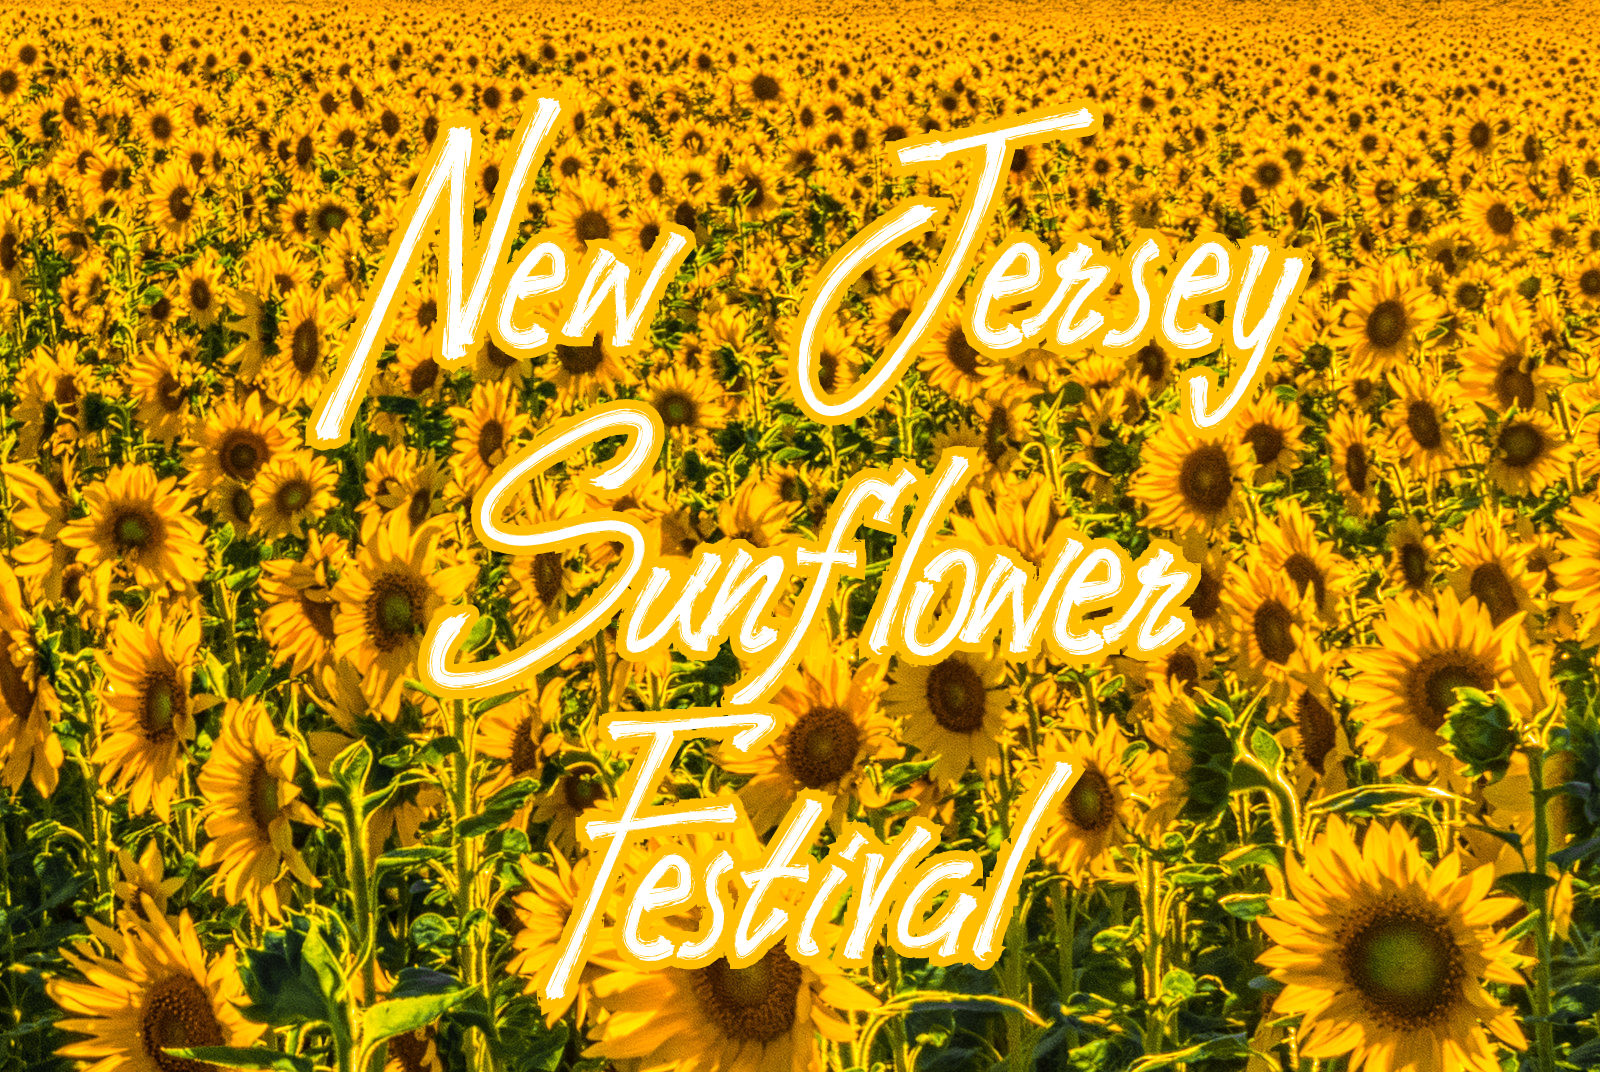 This Sunflower Festival In New Jersey Will Make Your Summer